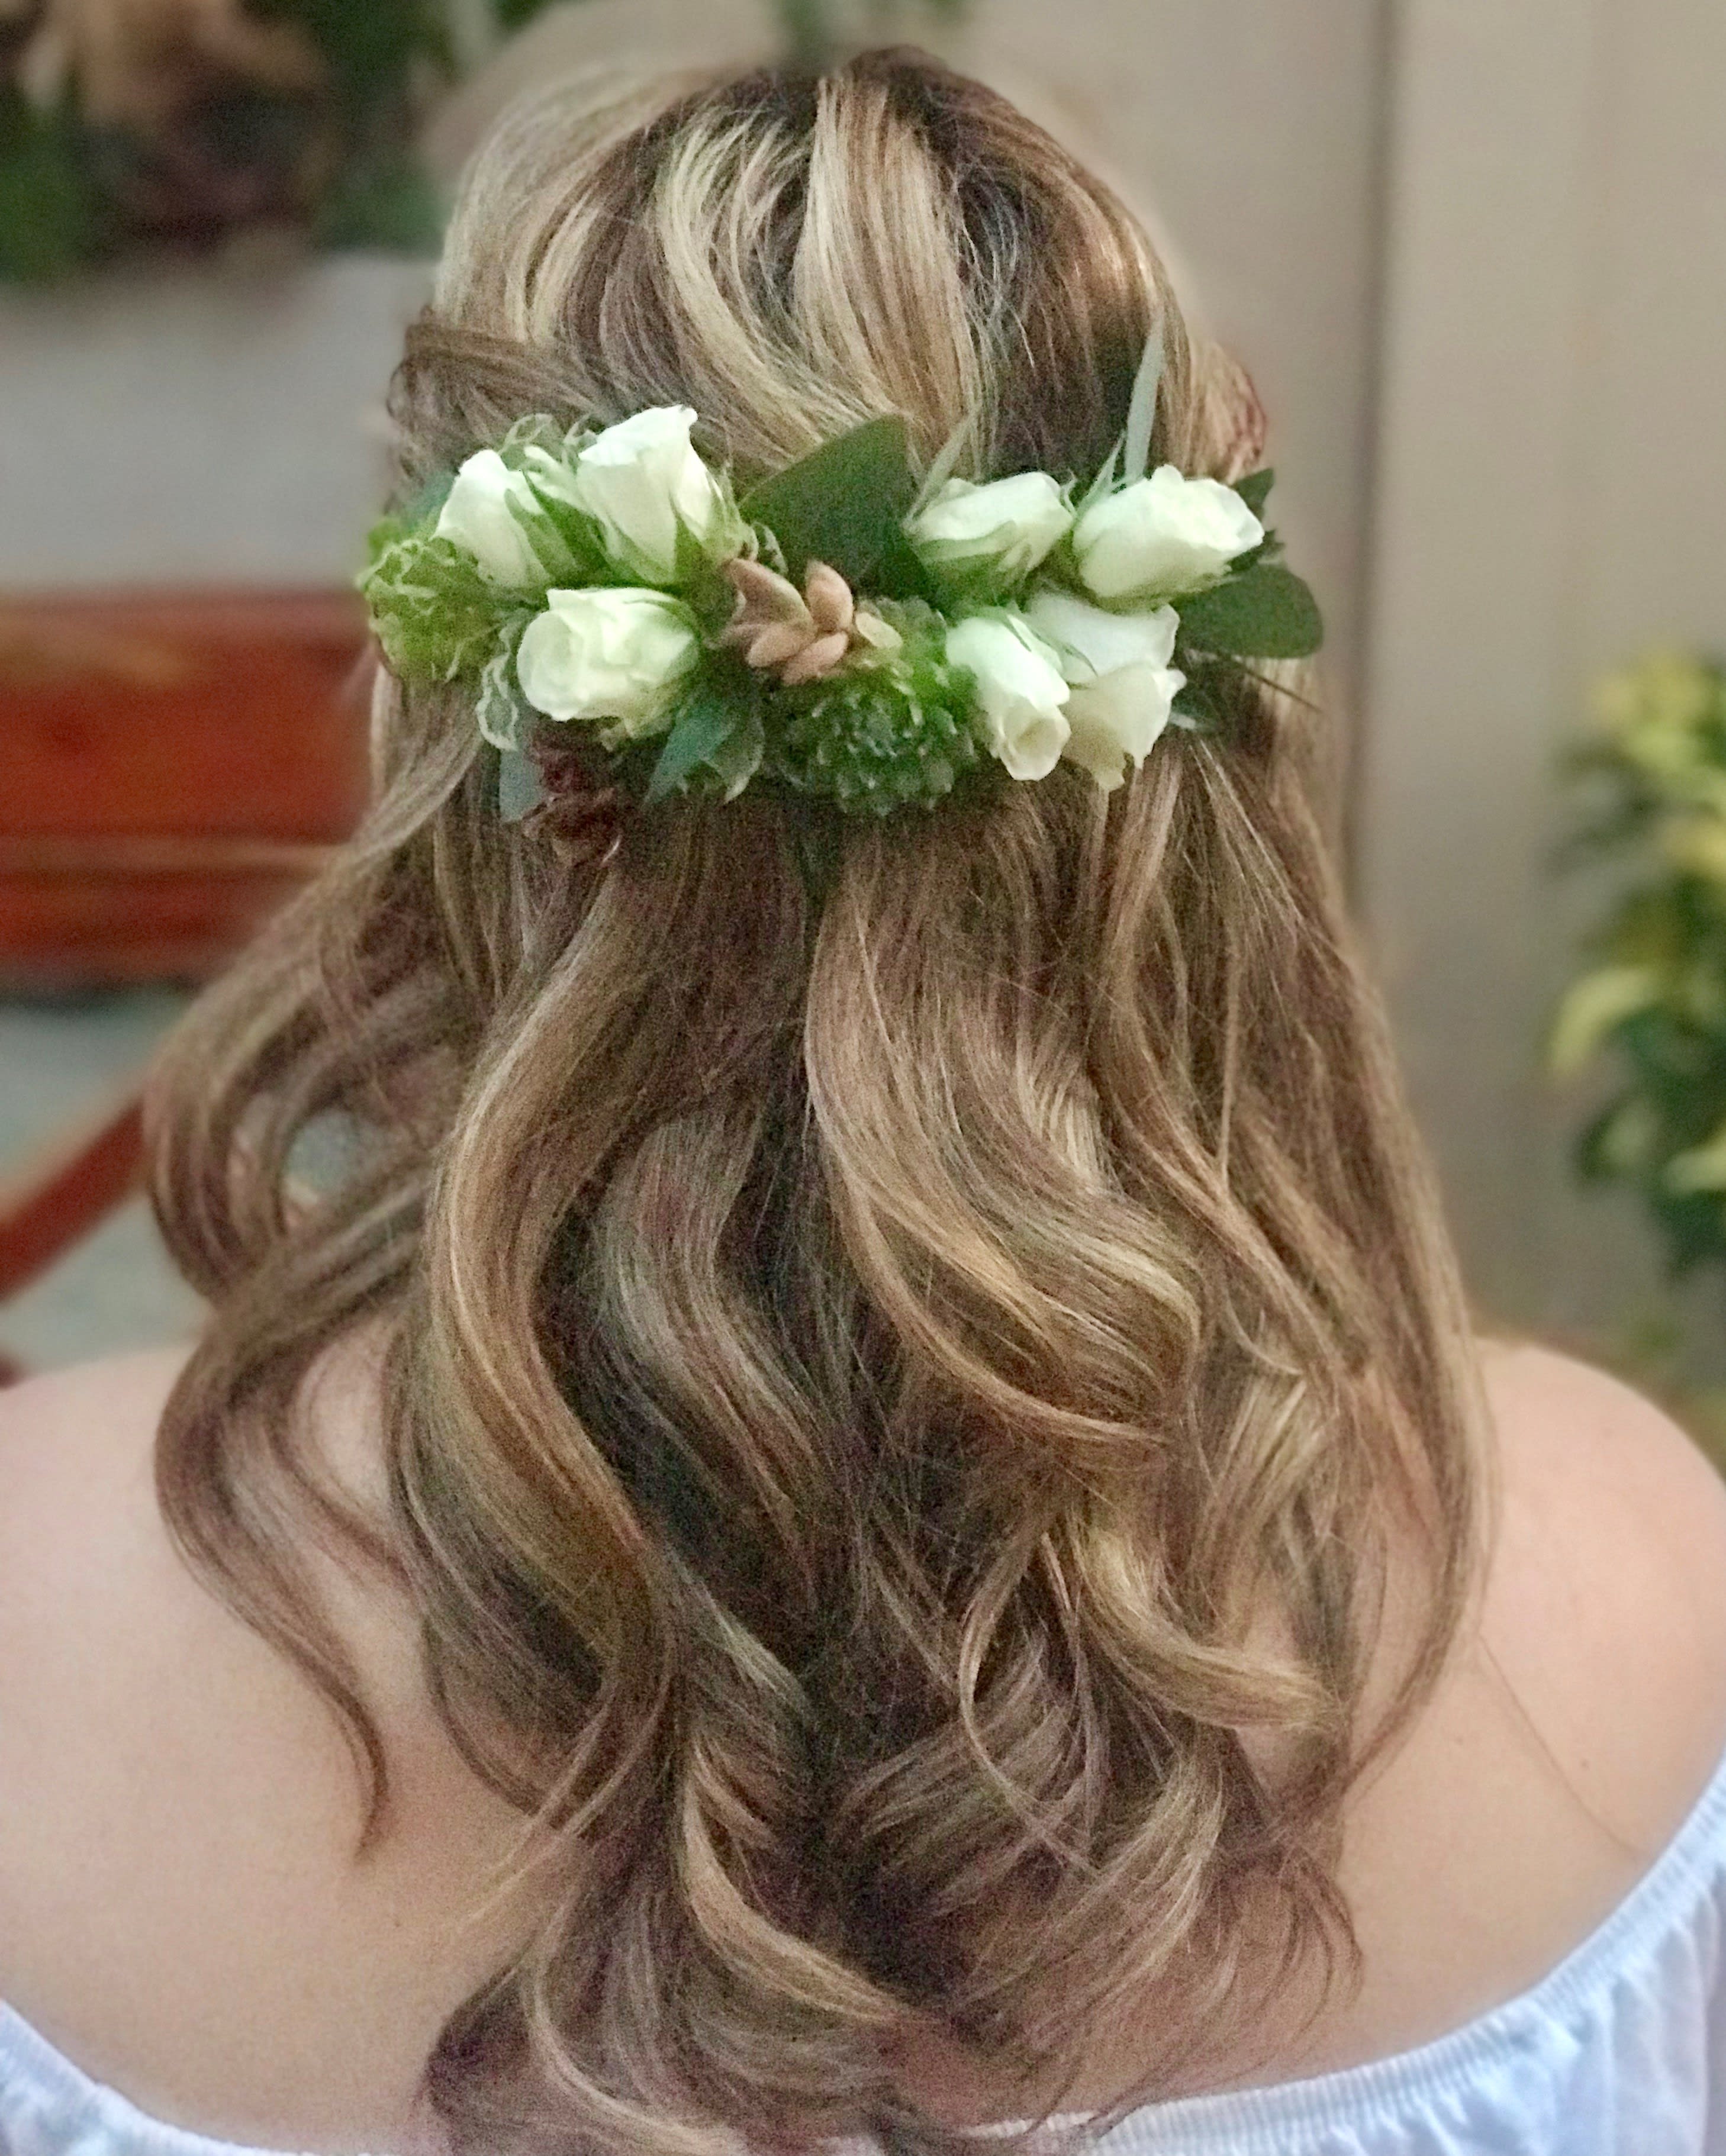 Wonder White - In this flower crown it has white roses and succulents to represent its elegance in style.